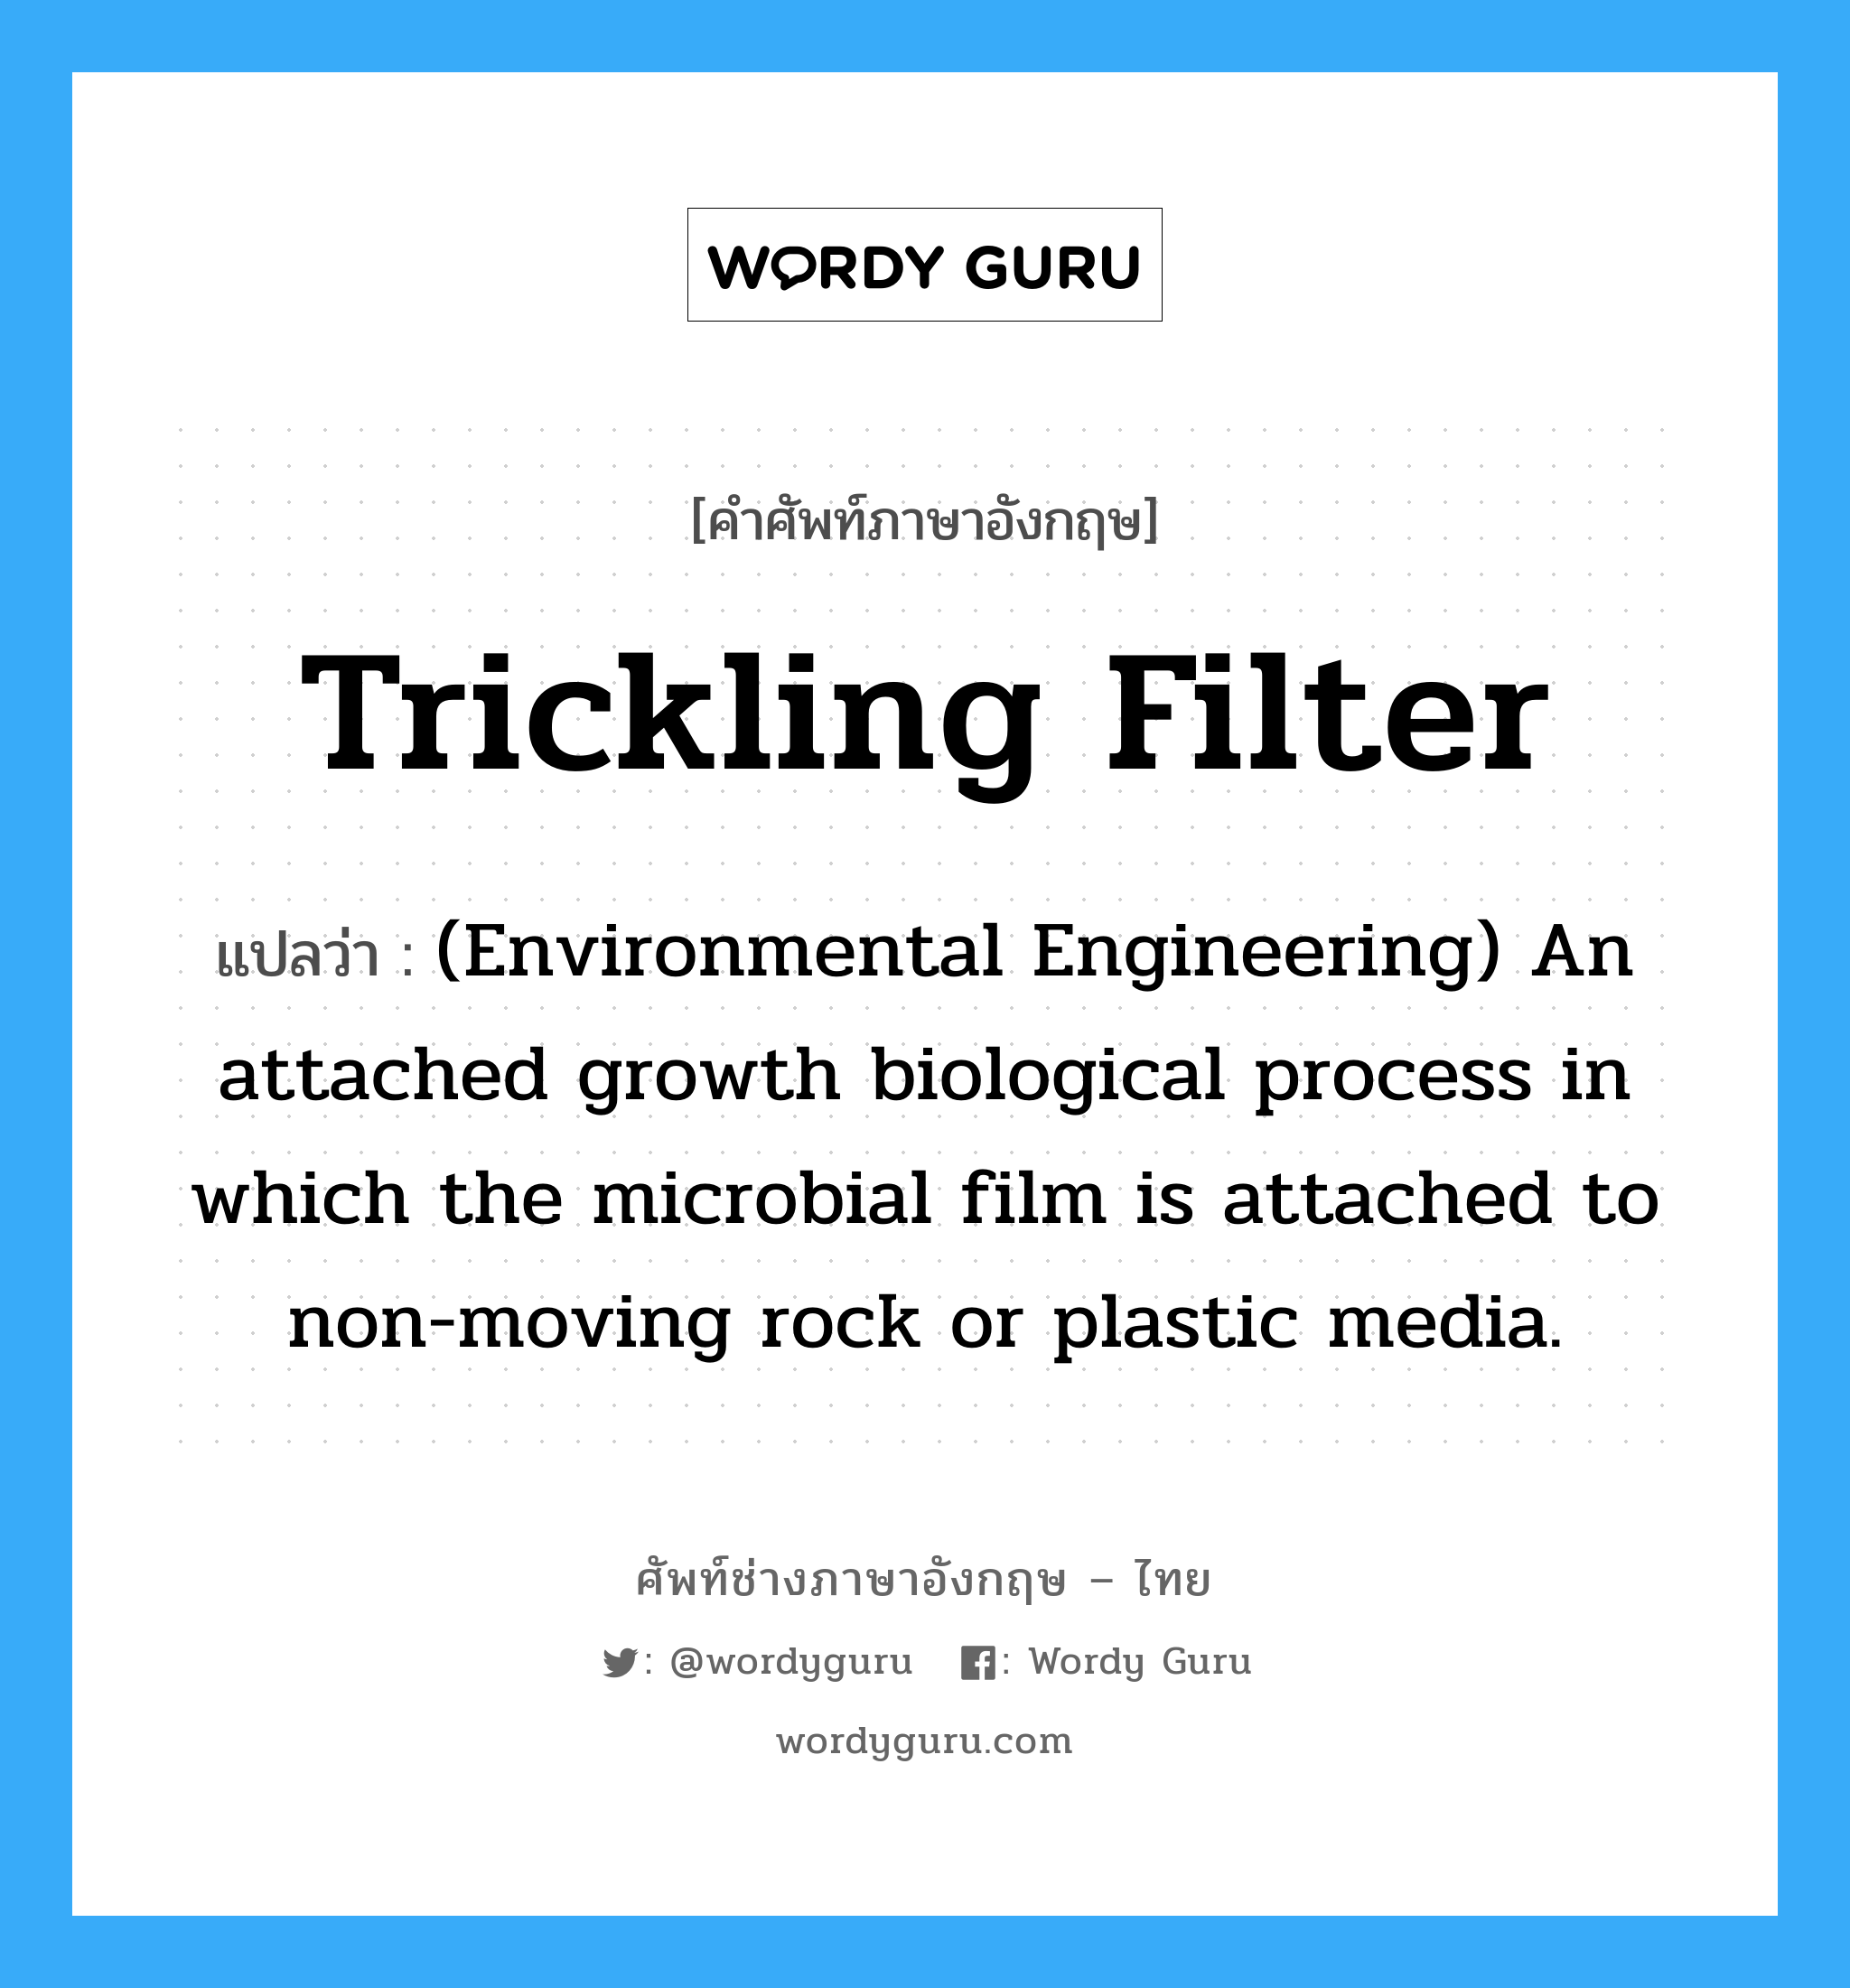 Trickling filter แปลว่า?, คำศัพท์ช่างภาษาอังกฤษ - ไทย Trickling filter คำศัพท์ภาษาอังกฤษ Trickling filter แปลว่า (Environmental Engineering) An attached growth biological process in which the microbial film is attached to non-moving rock or plastic media.